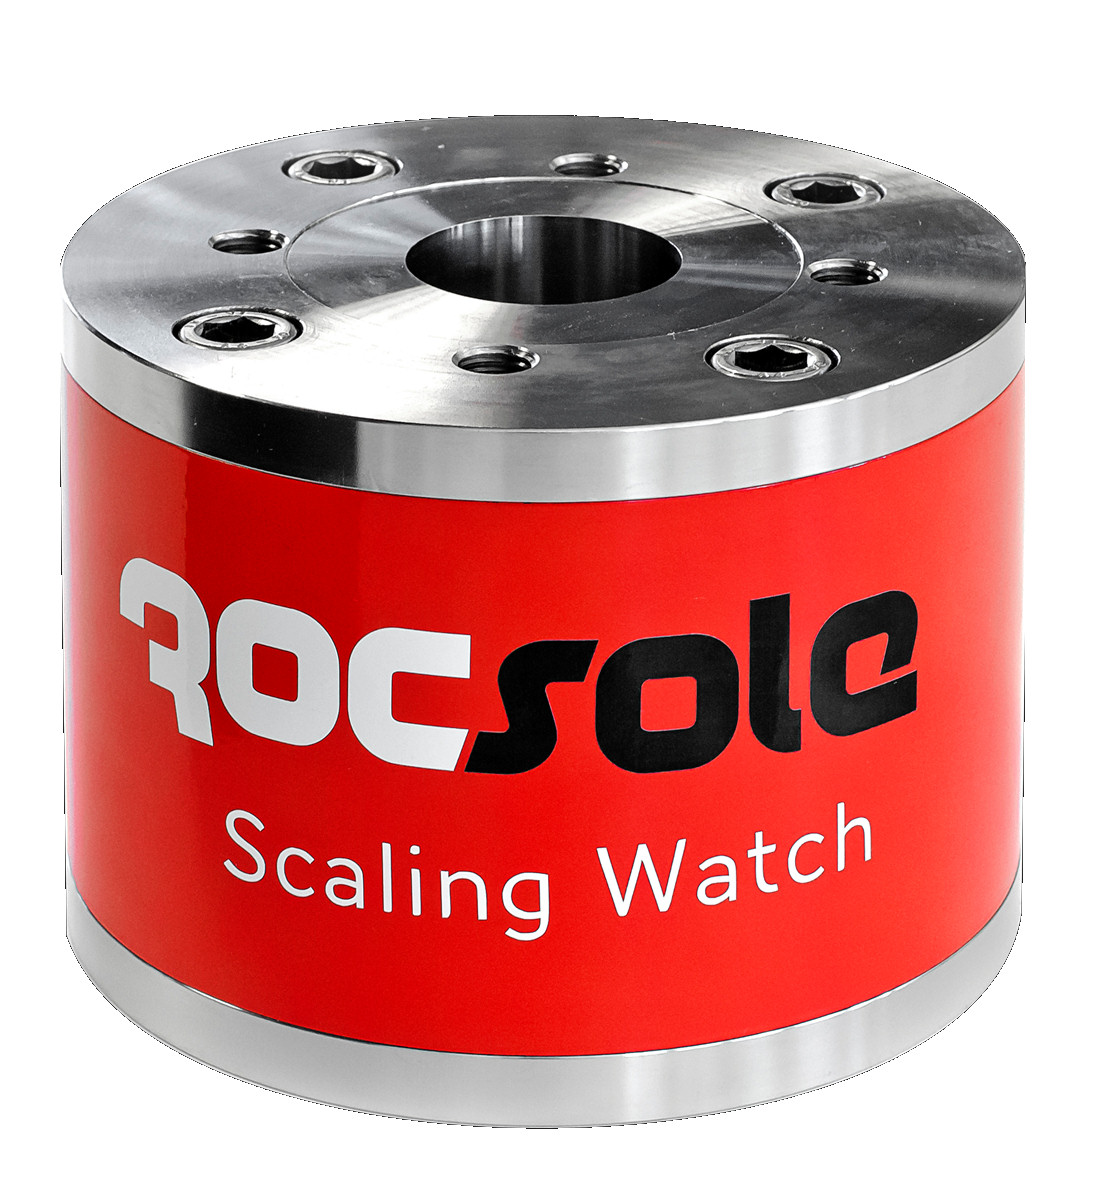 Flowrox is introducing the Flowrox Scaling Watch, a new product designed for the precise measurement of scale in pipelines and other fluid control environments.